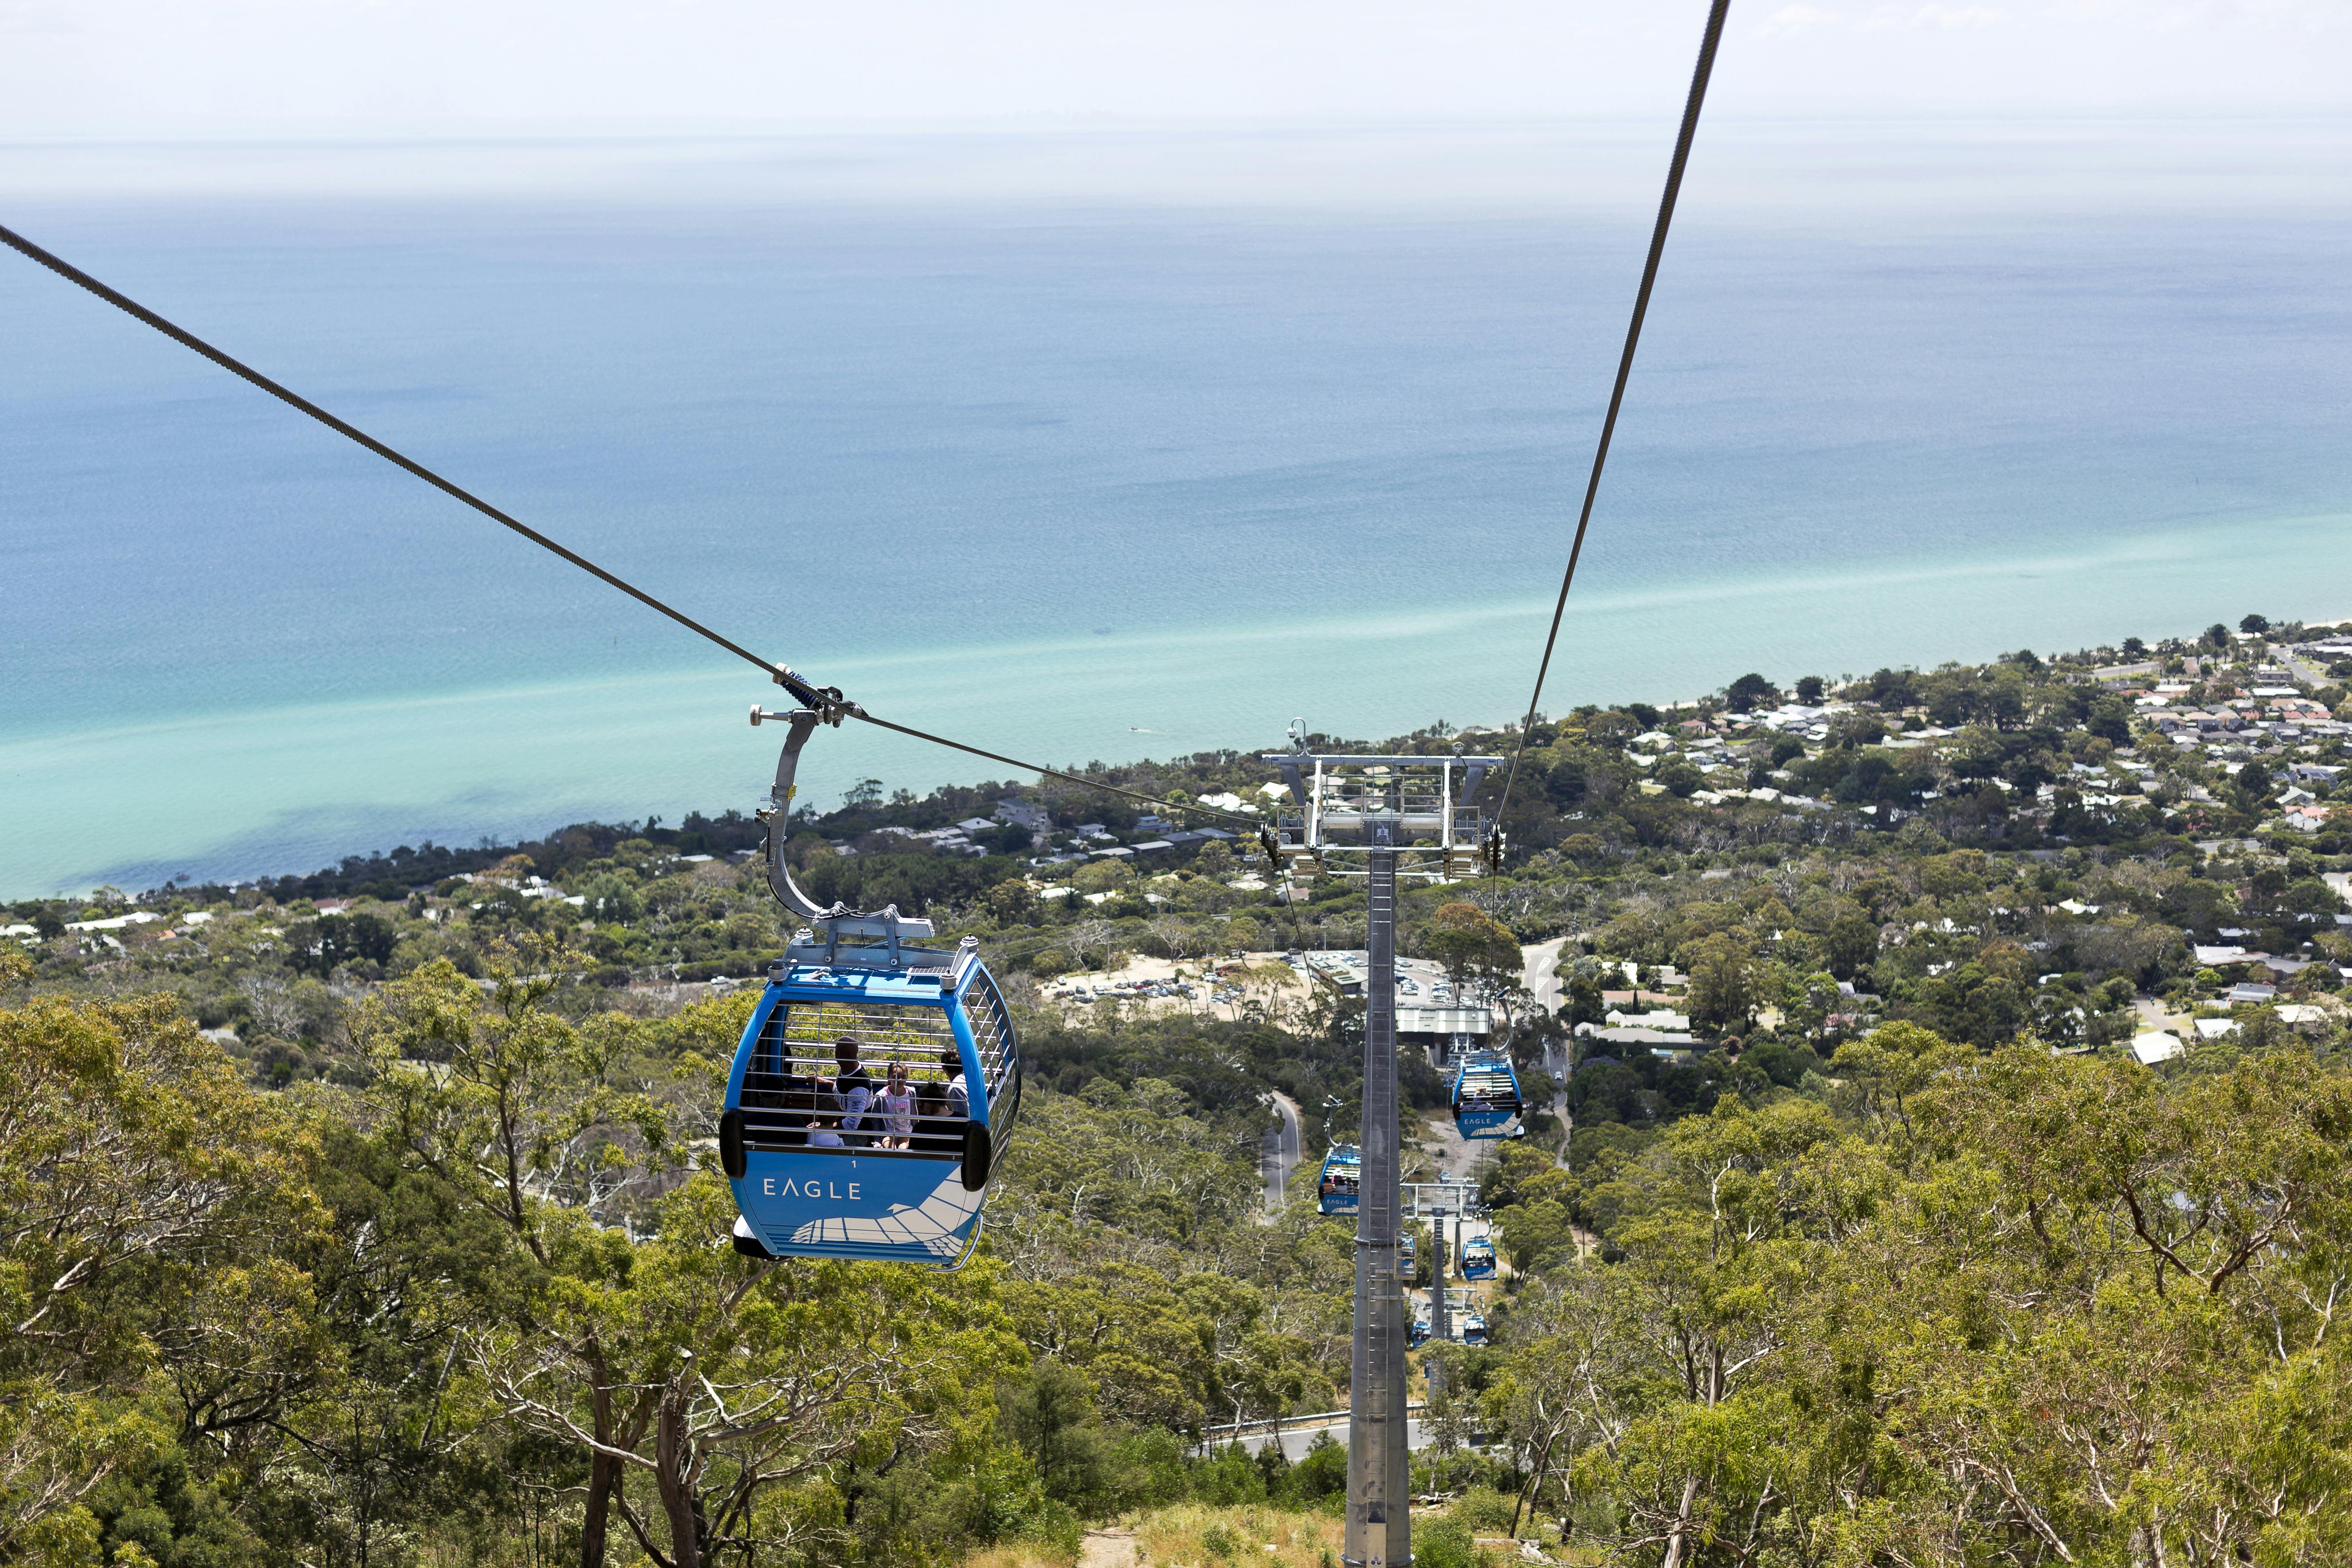 Mornington Peninsula scenic bus tour including chairlift, lunch, choc tasting and more Musement